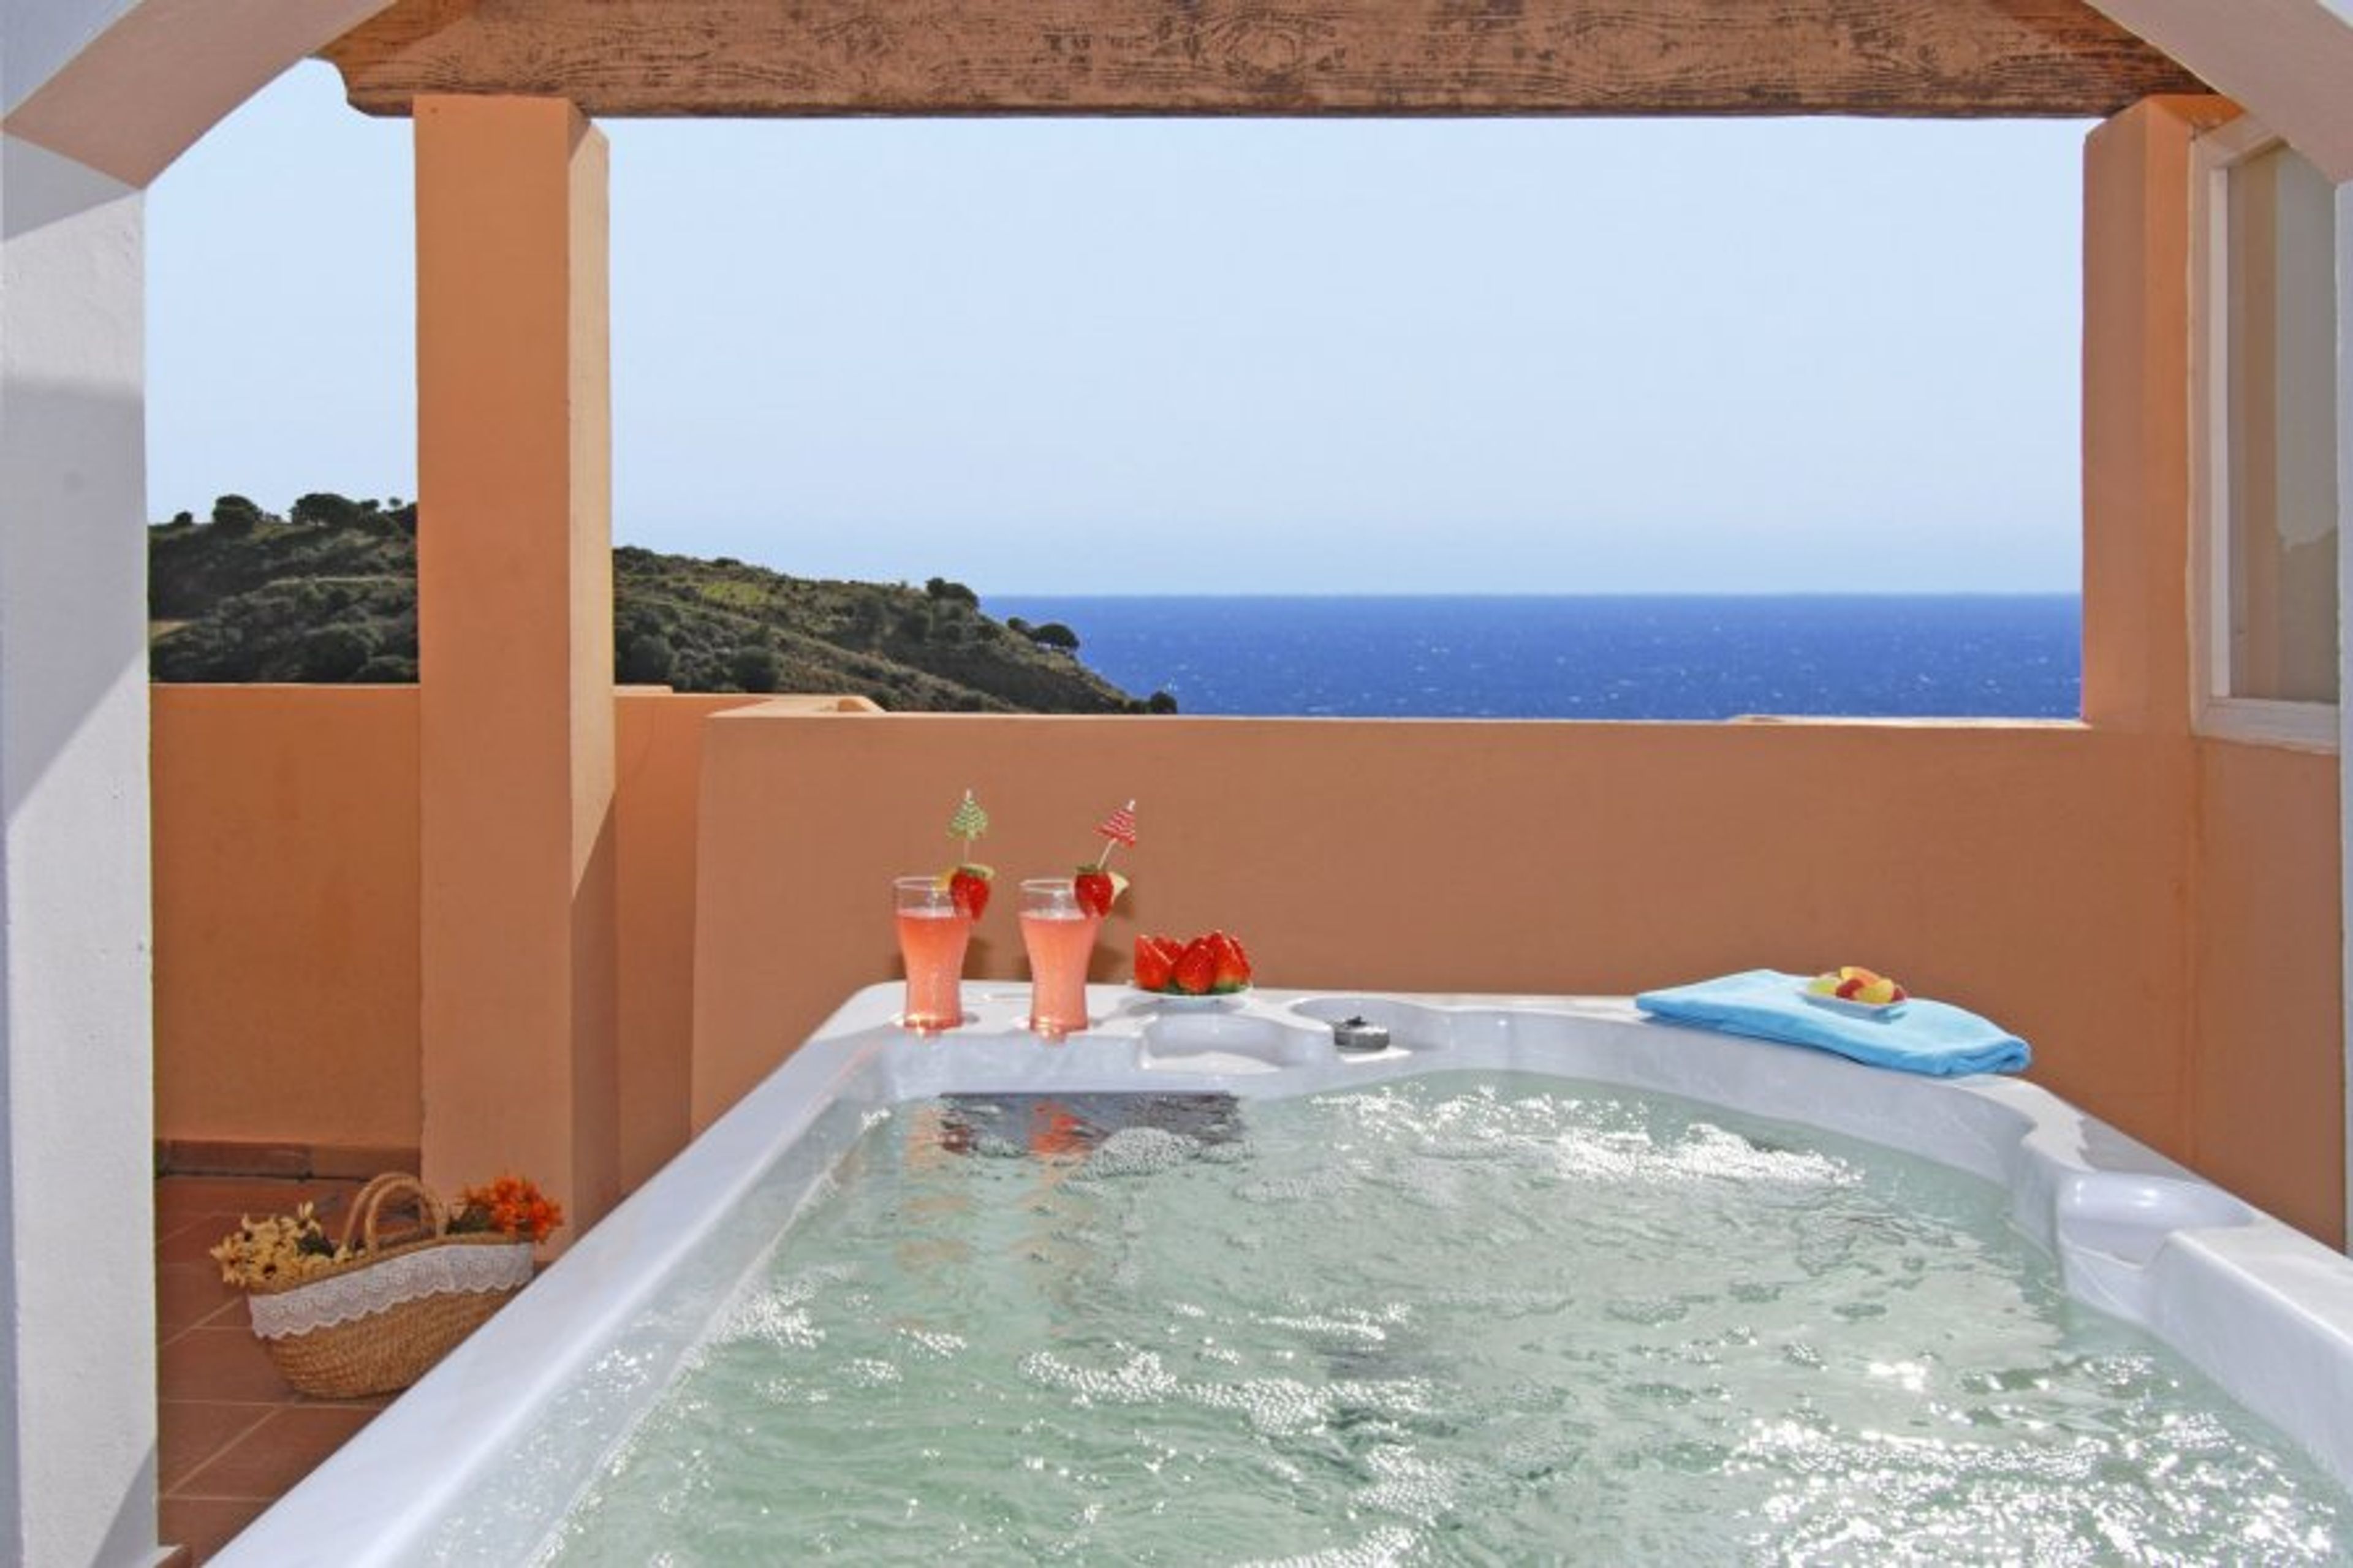 Sit in the jacuzzi and take in the breathtaking views!